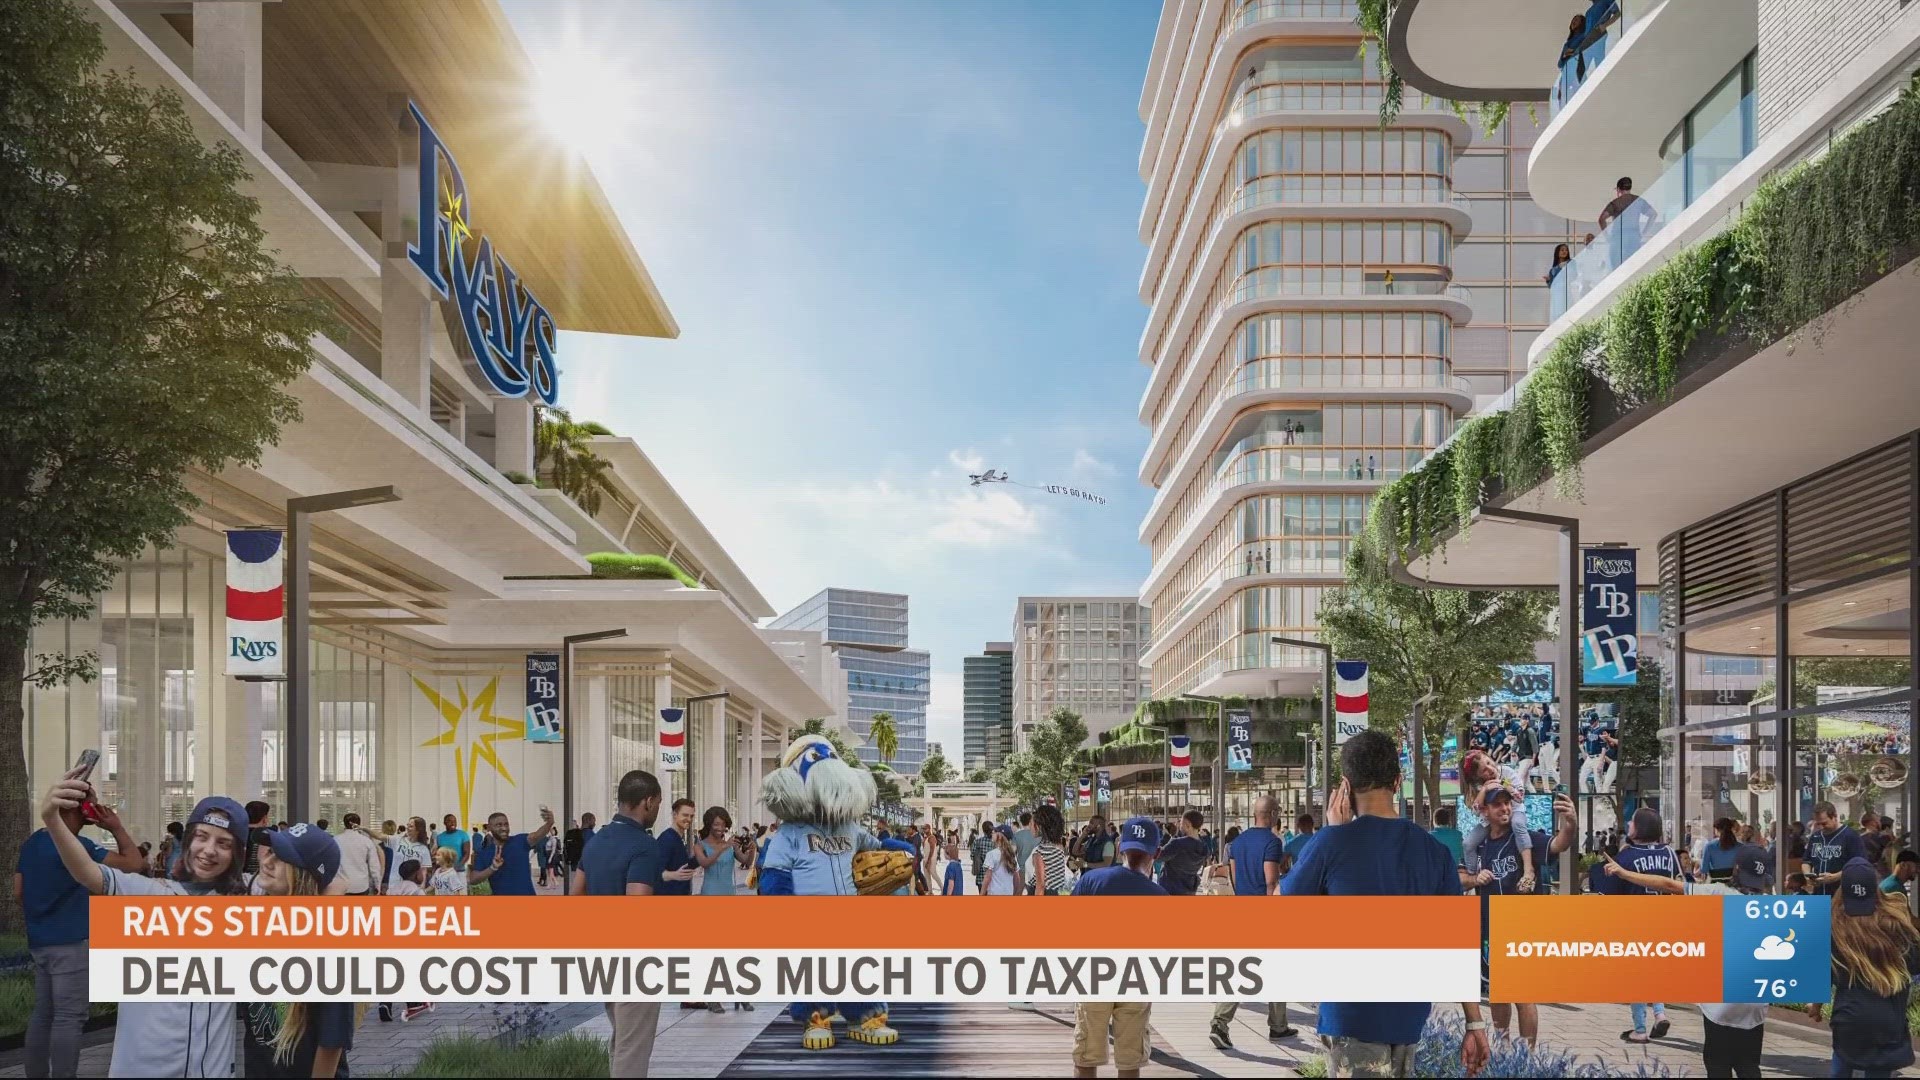 The new stadium deal might not be a home run for taxpayers, with interest on debt, Pinellas residents could pay more than a $1B to cover costs.